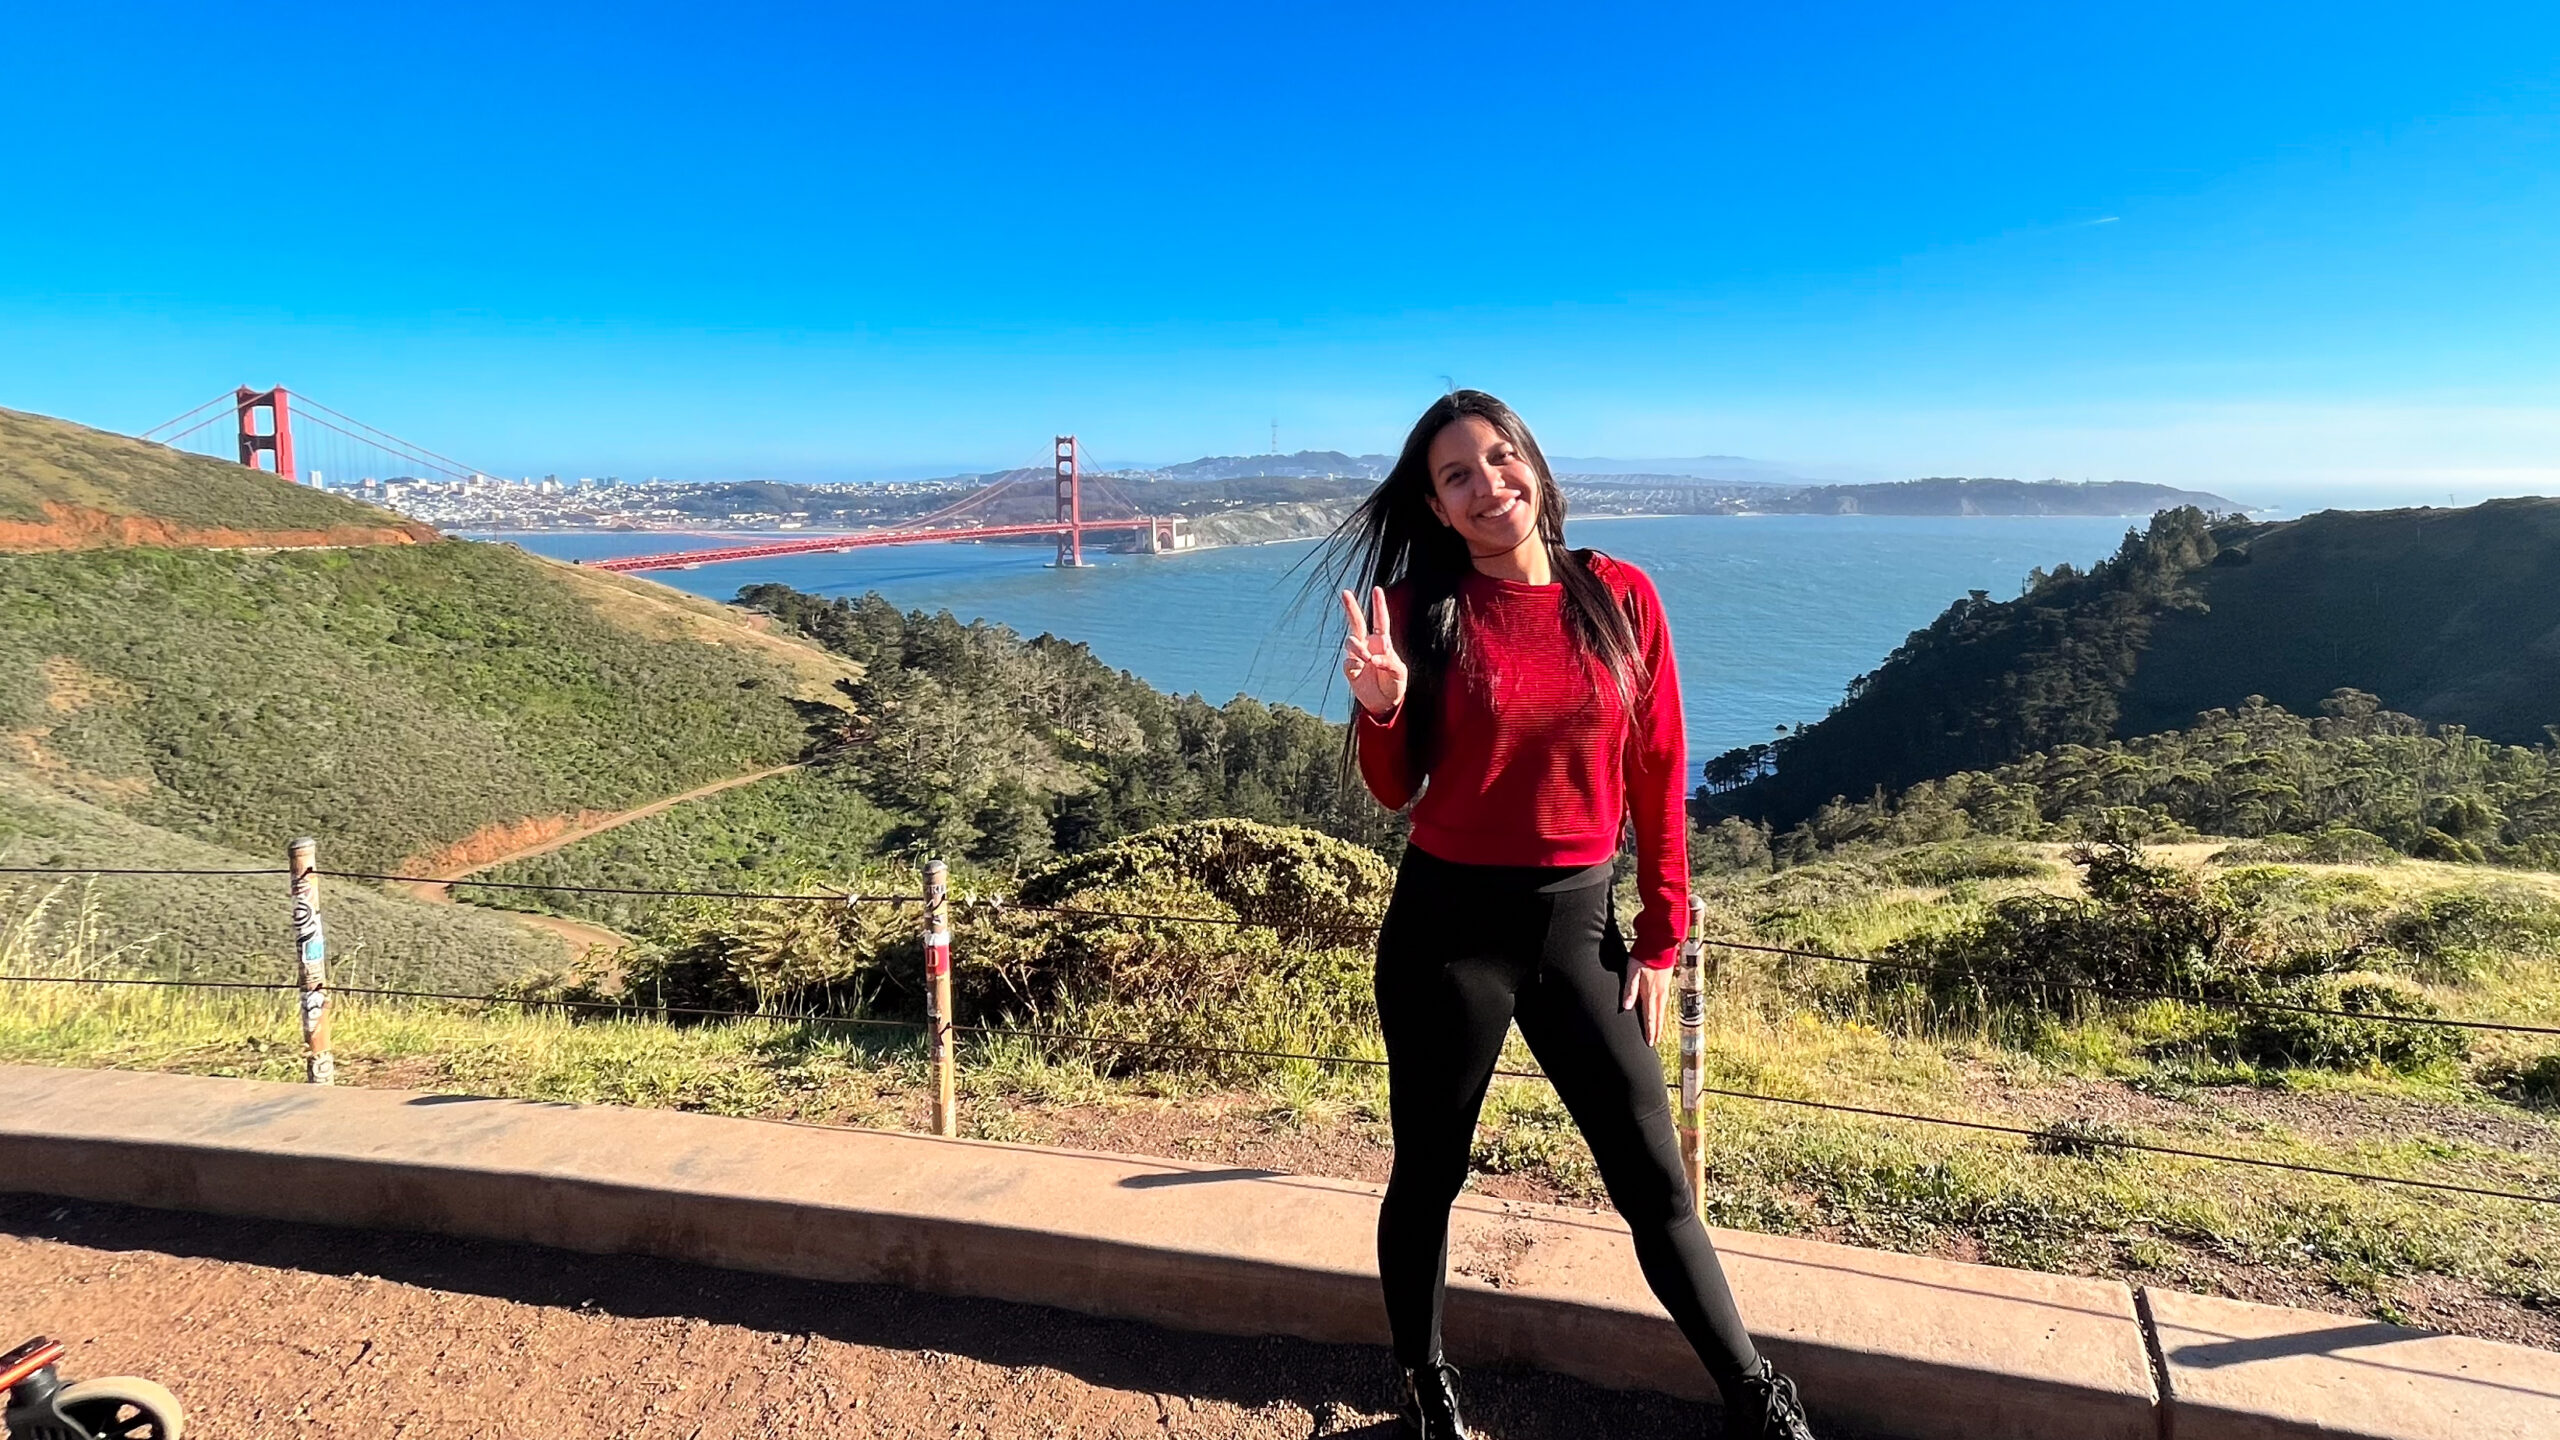 Laurie in front of the Golden Gate Bridge